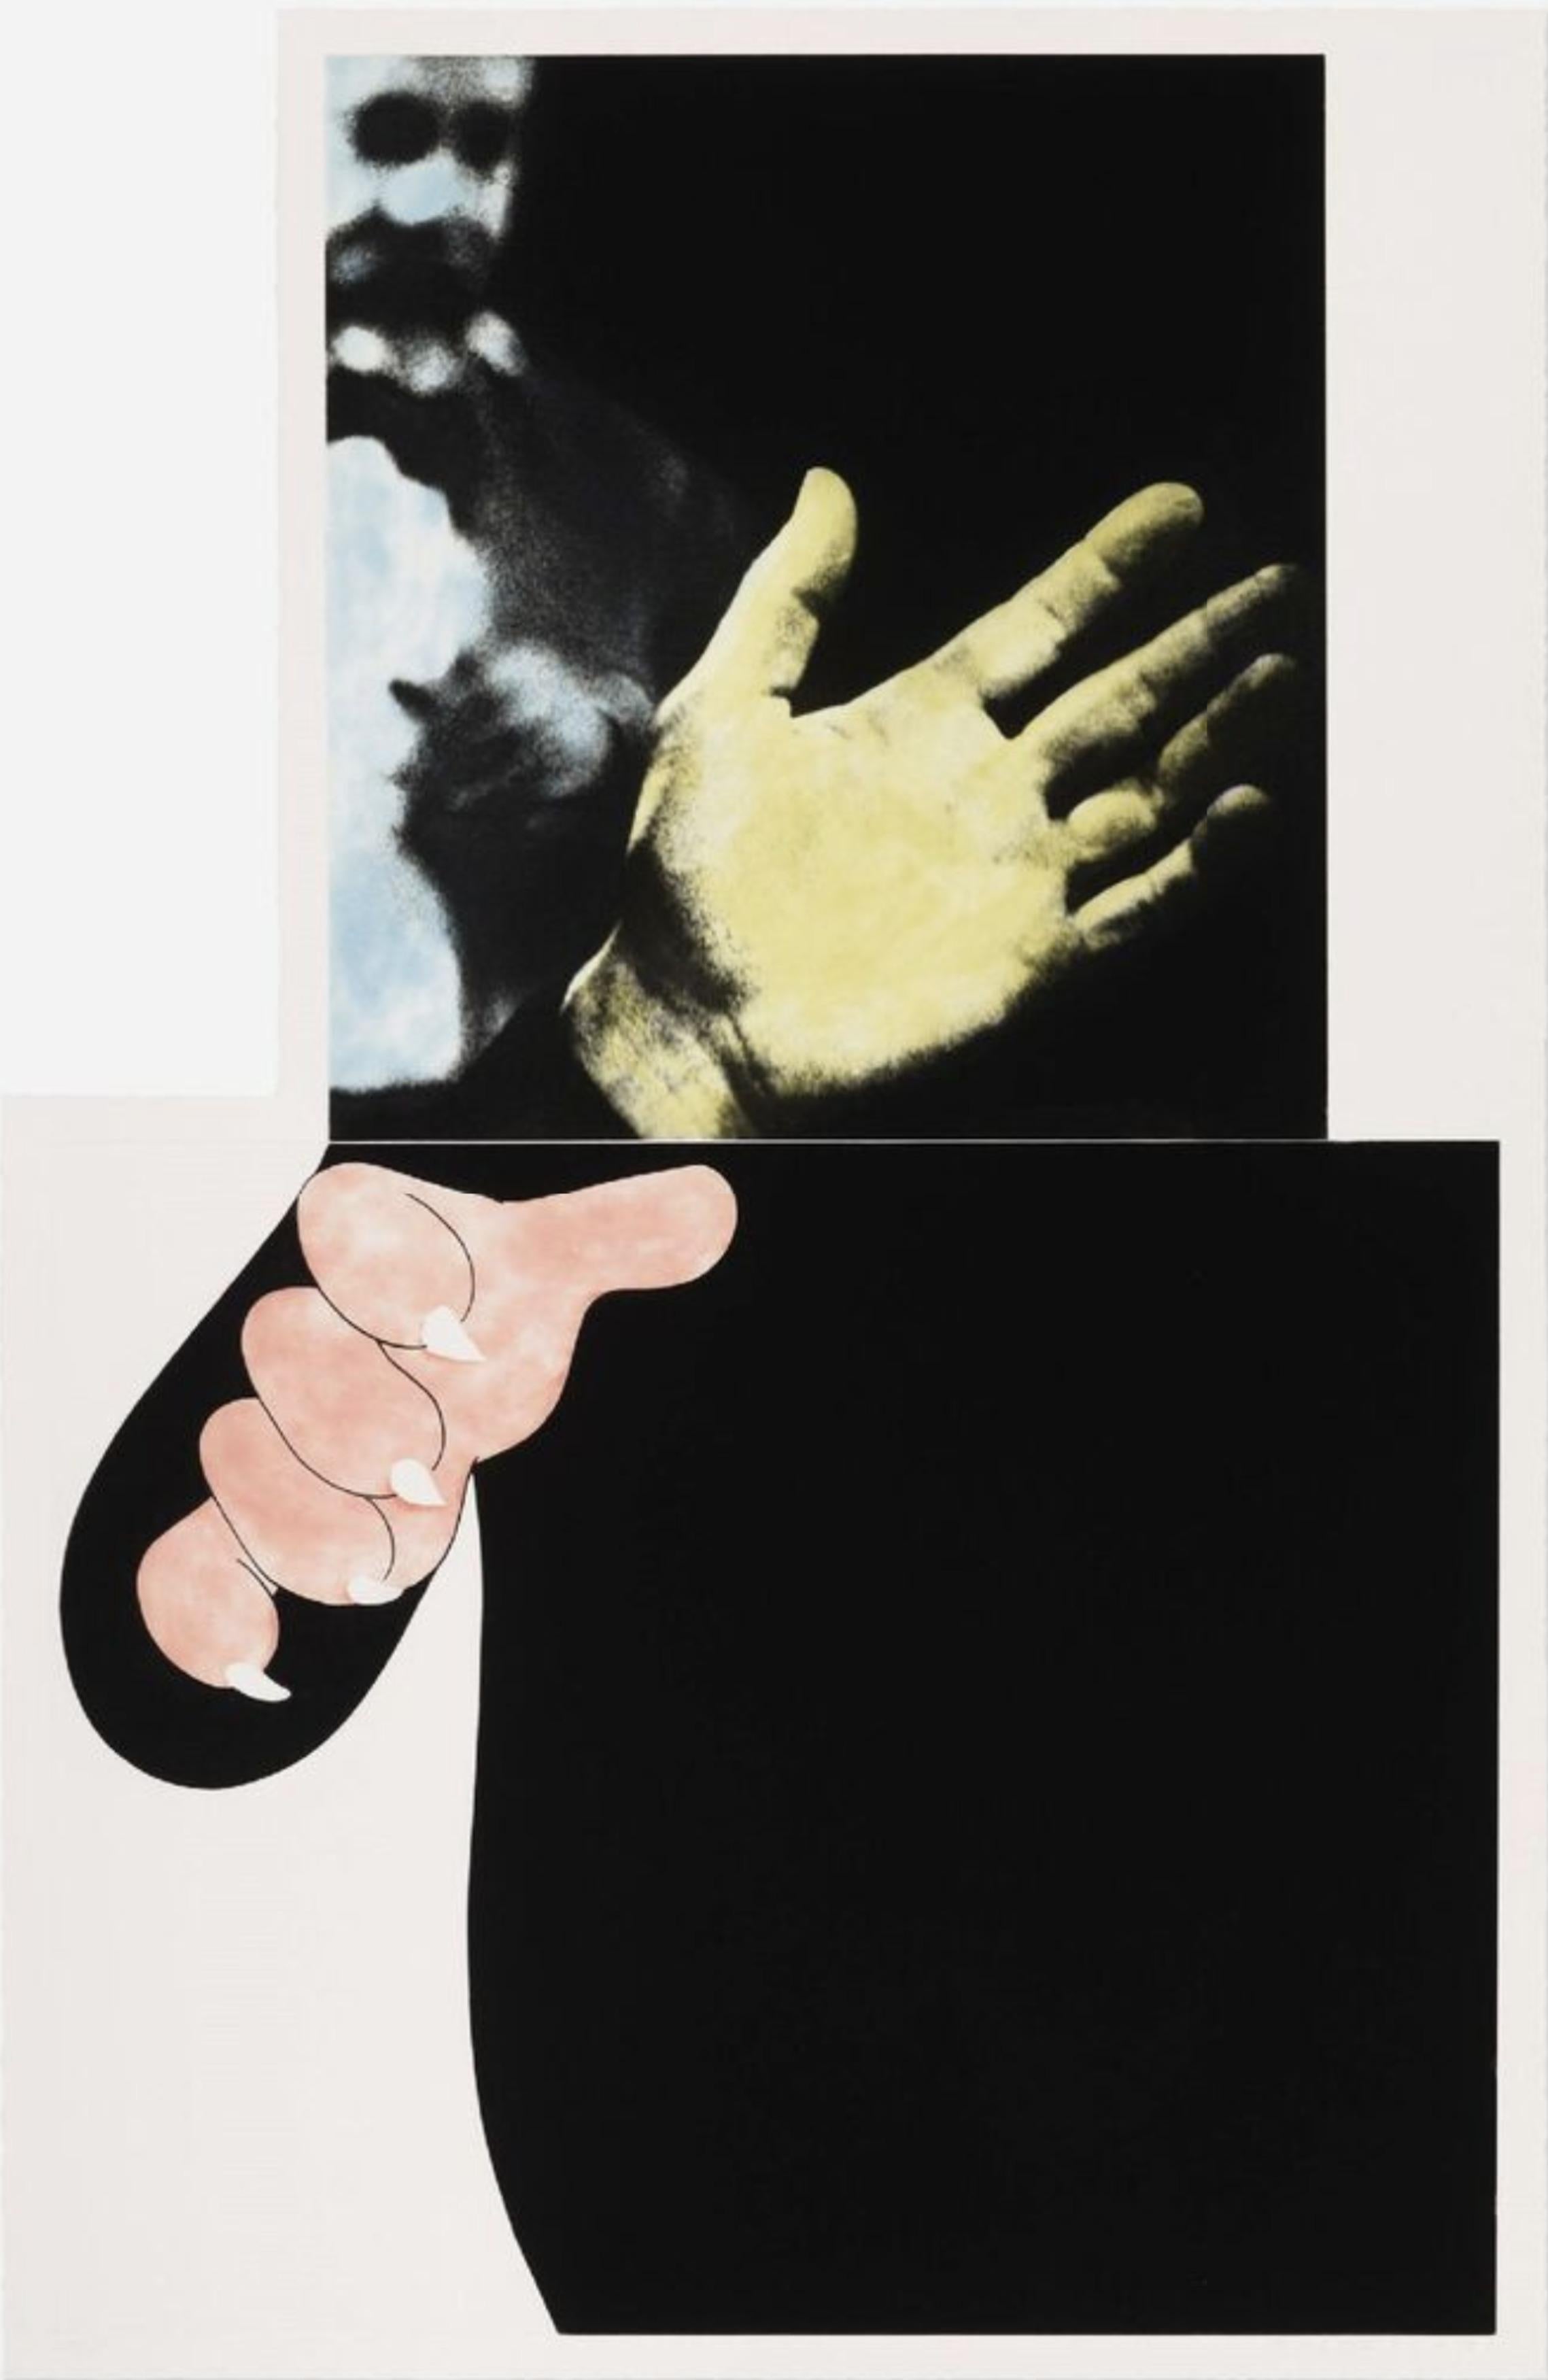 Two Hands (With Distant Figure) - Print by John Baldessari